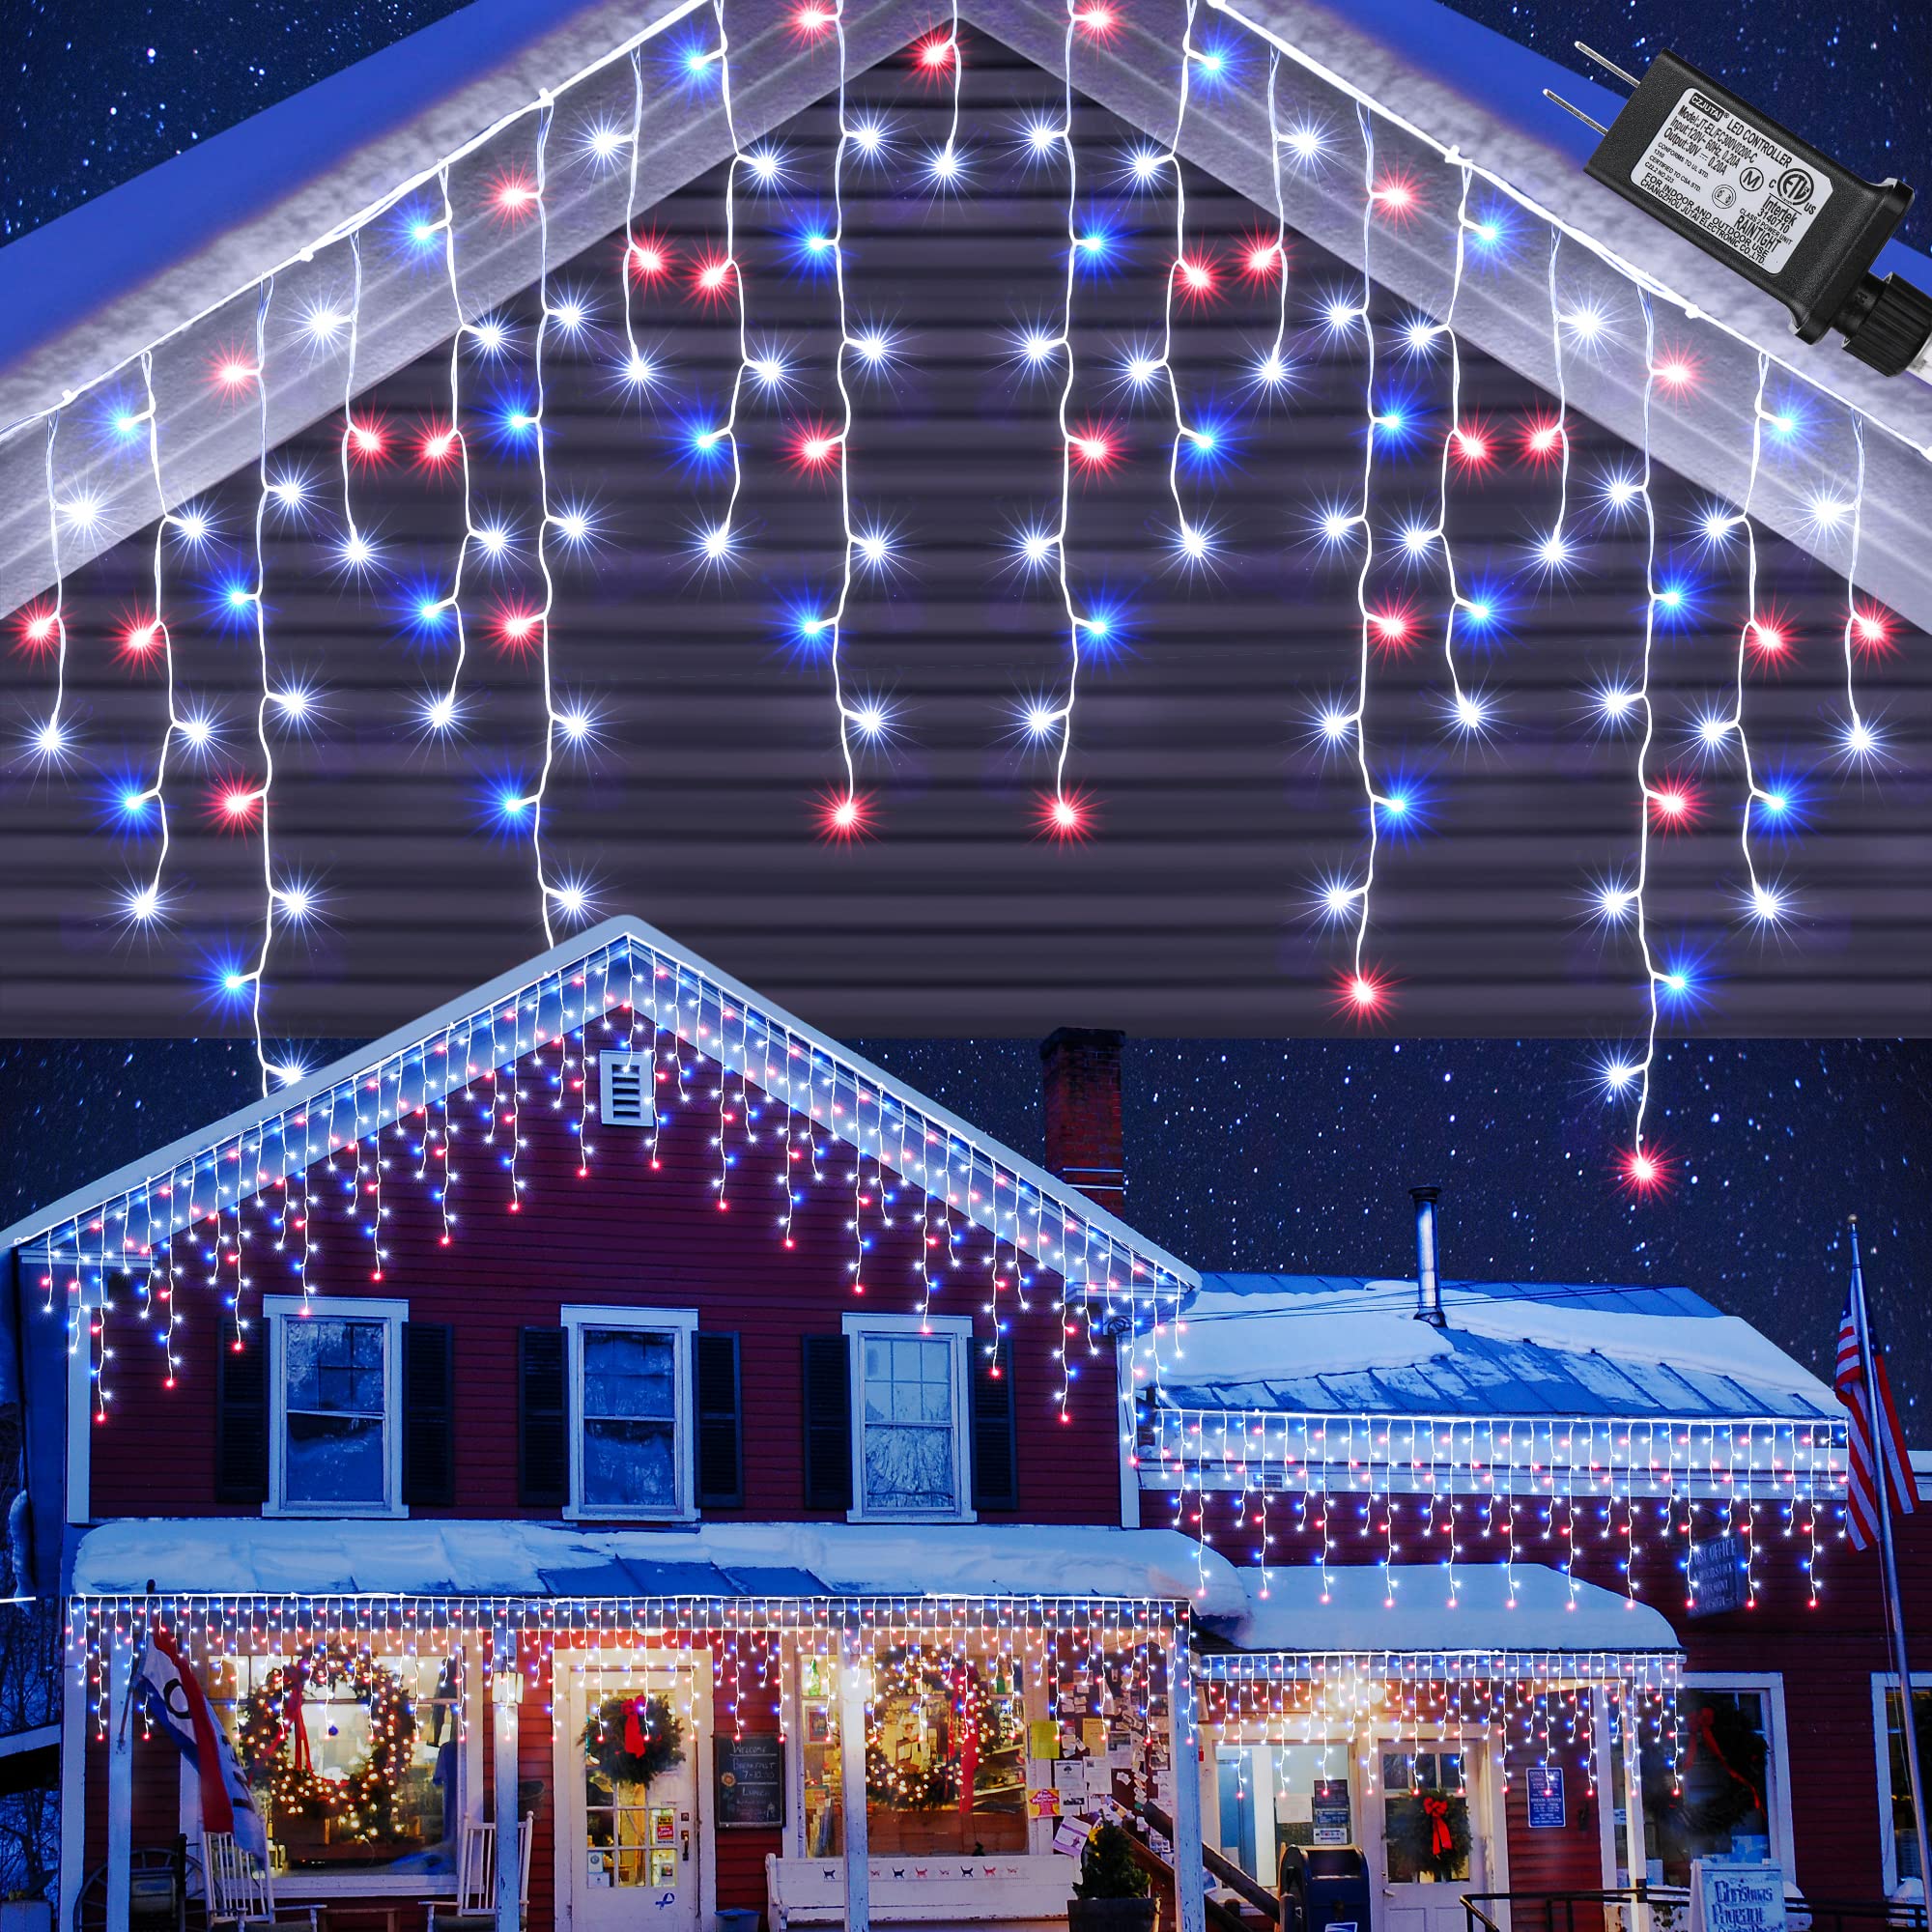 Brightown Icicle Lights Outdoor, 40Ft 432 Led Christmas Lights With 81  Drops, Dimmable Twinkle Fairy Lights With Remote And Timer, Christm